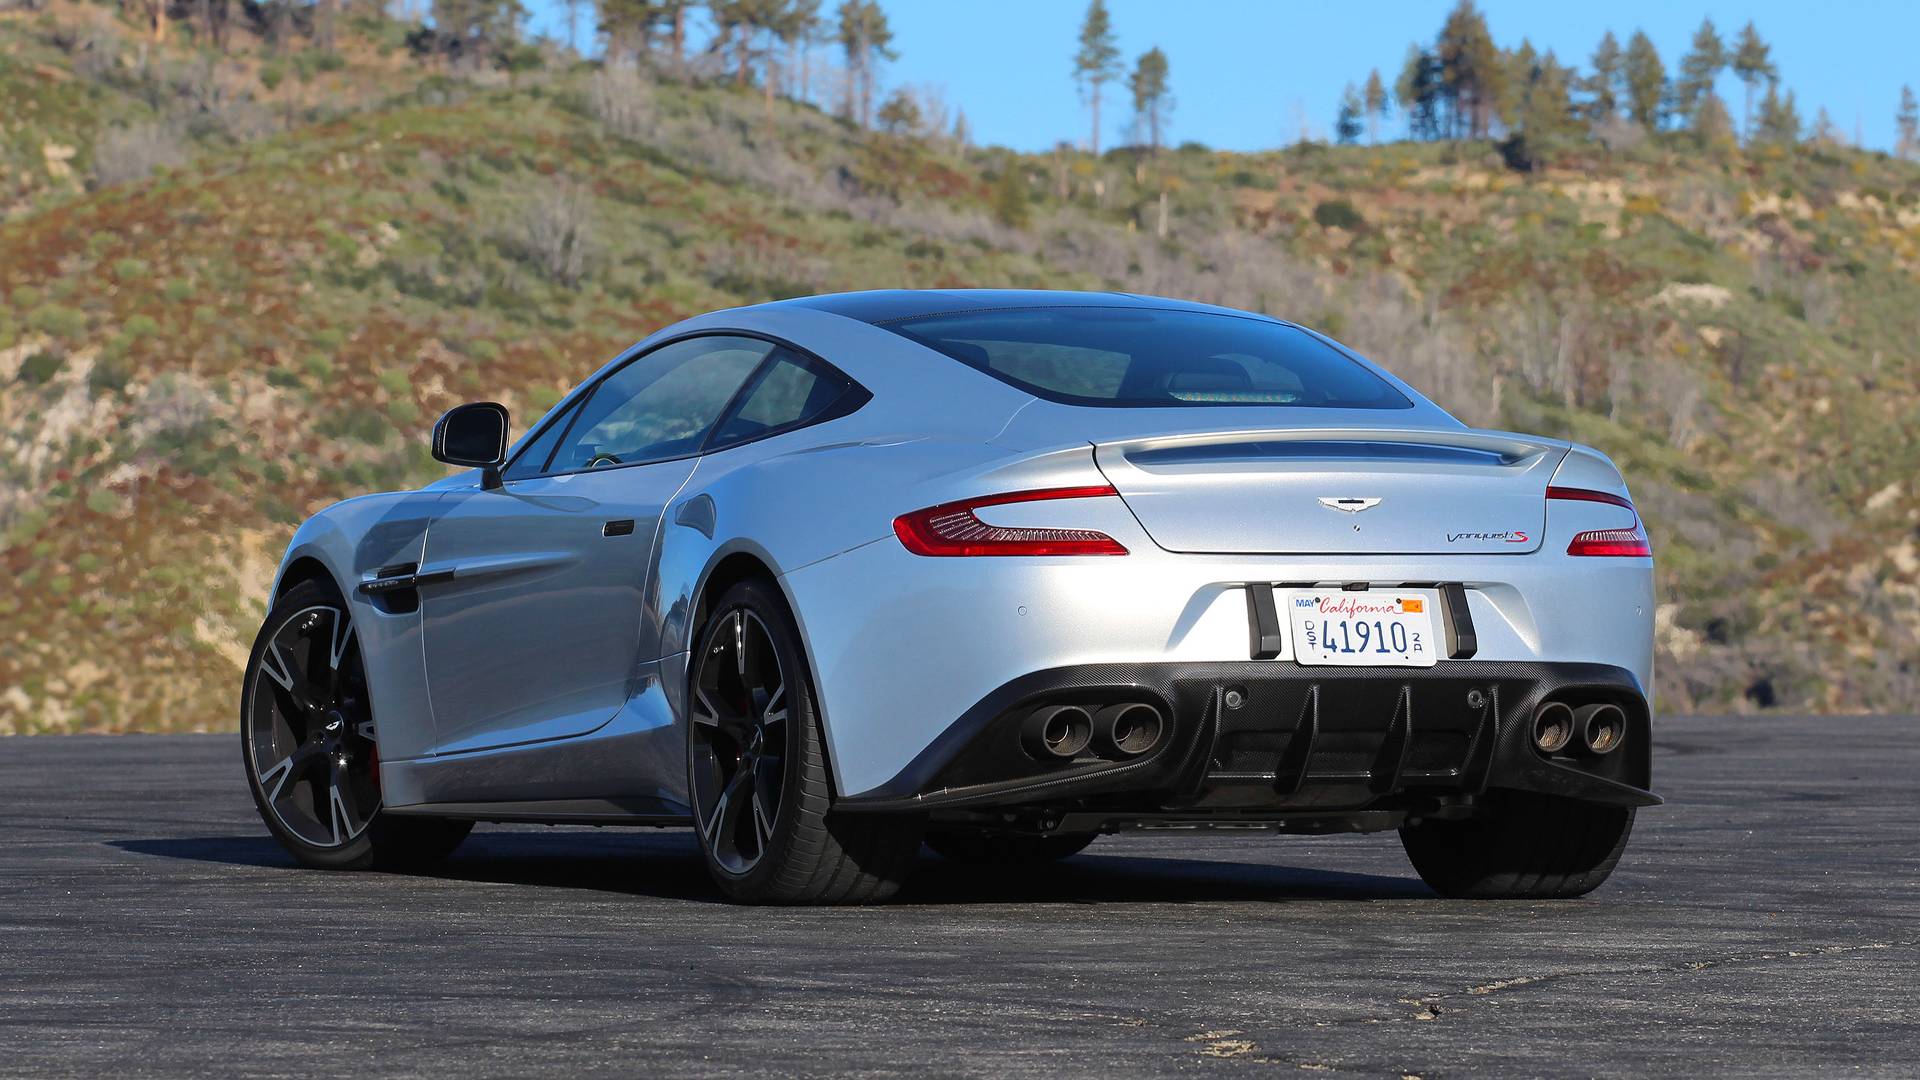 Aston Martin Vanquish S Coupe Review: Going Out With A Bang